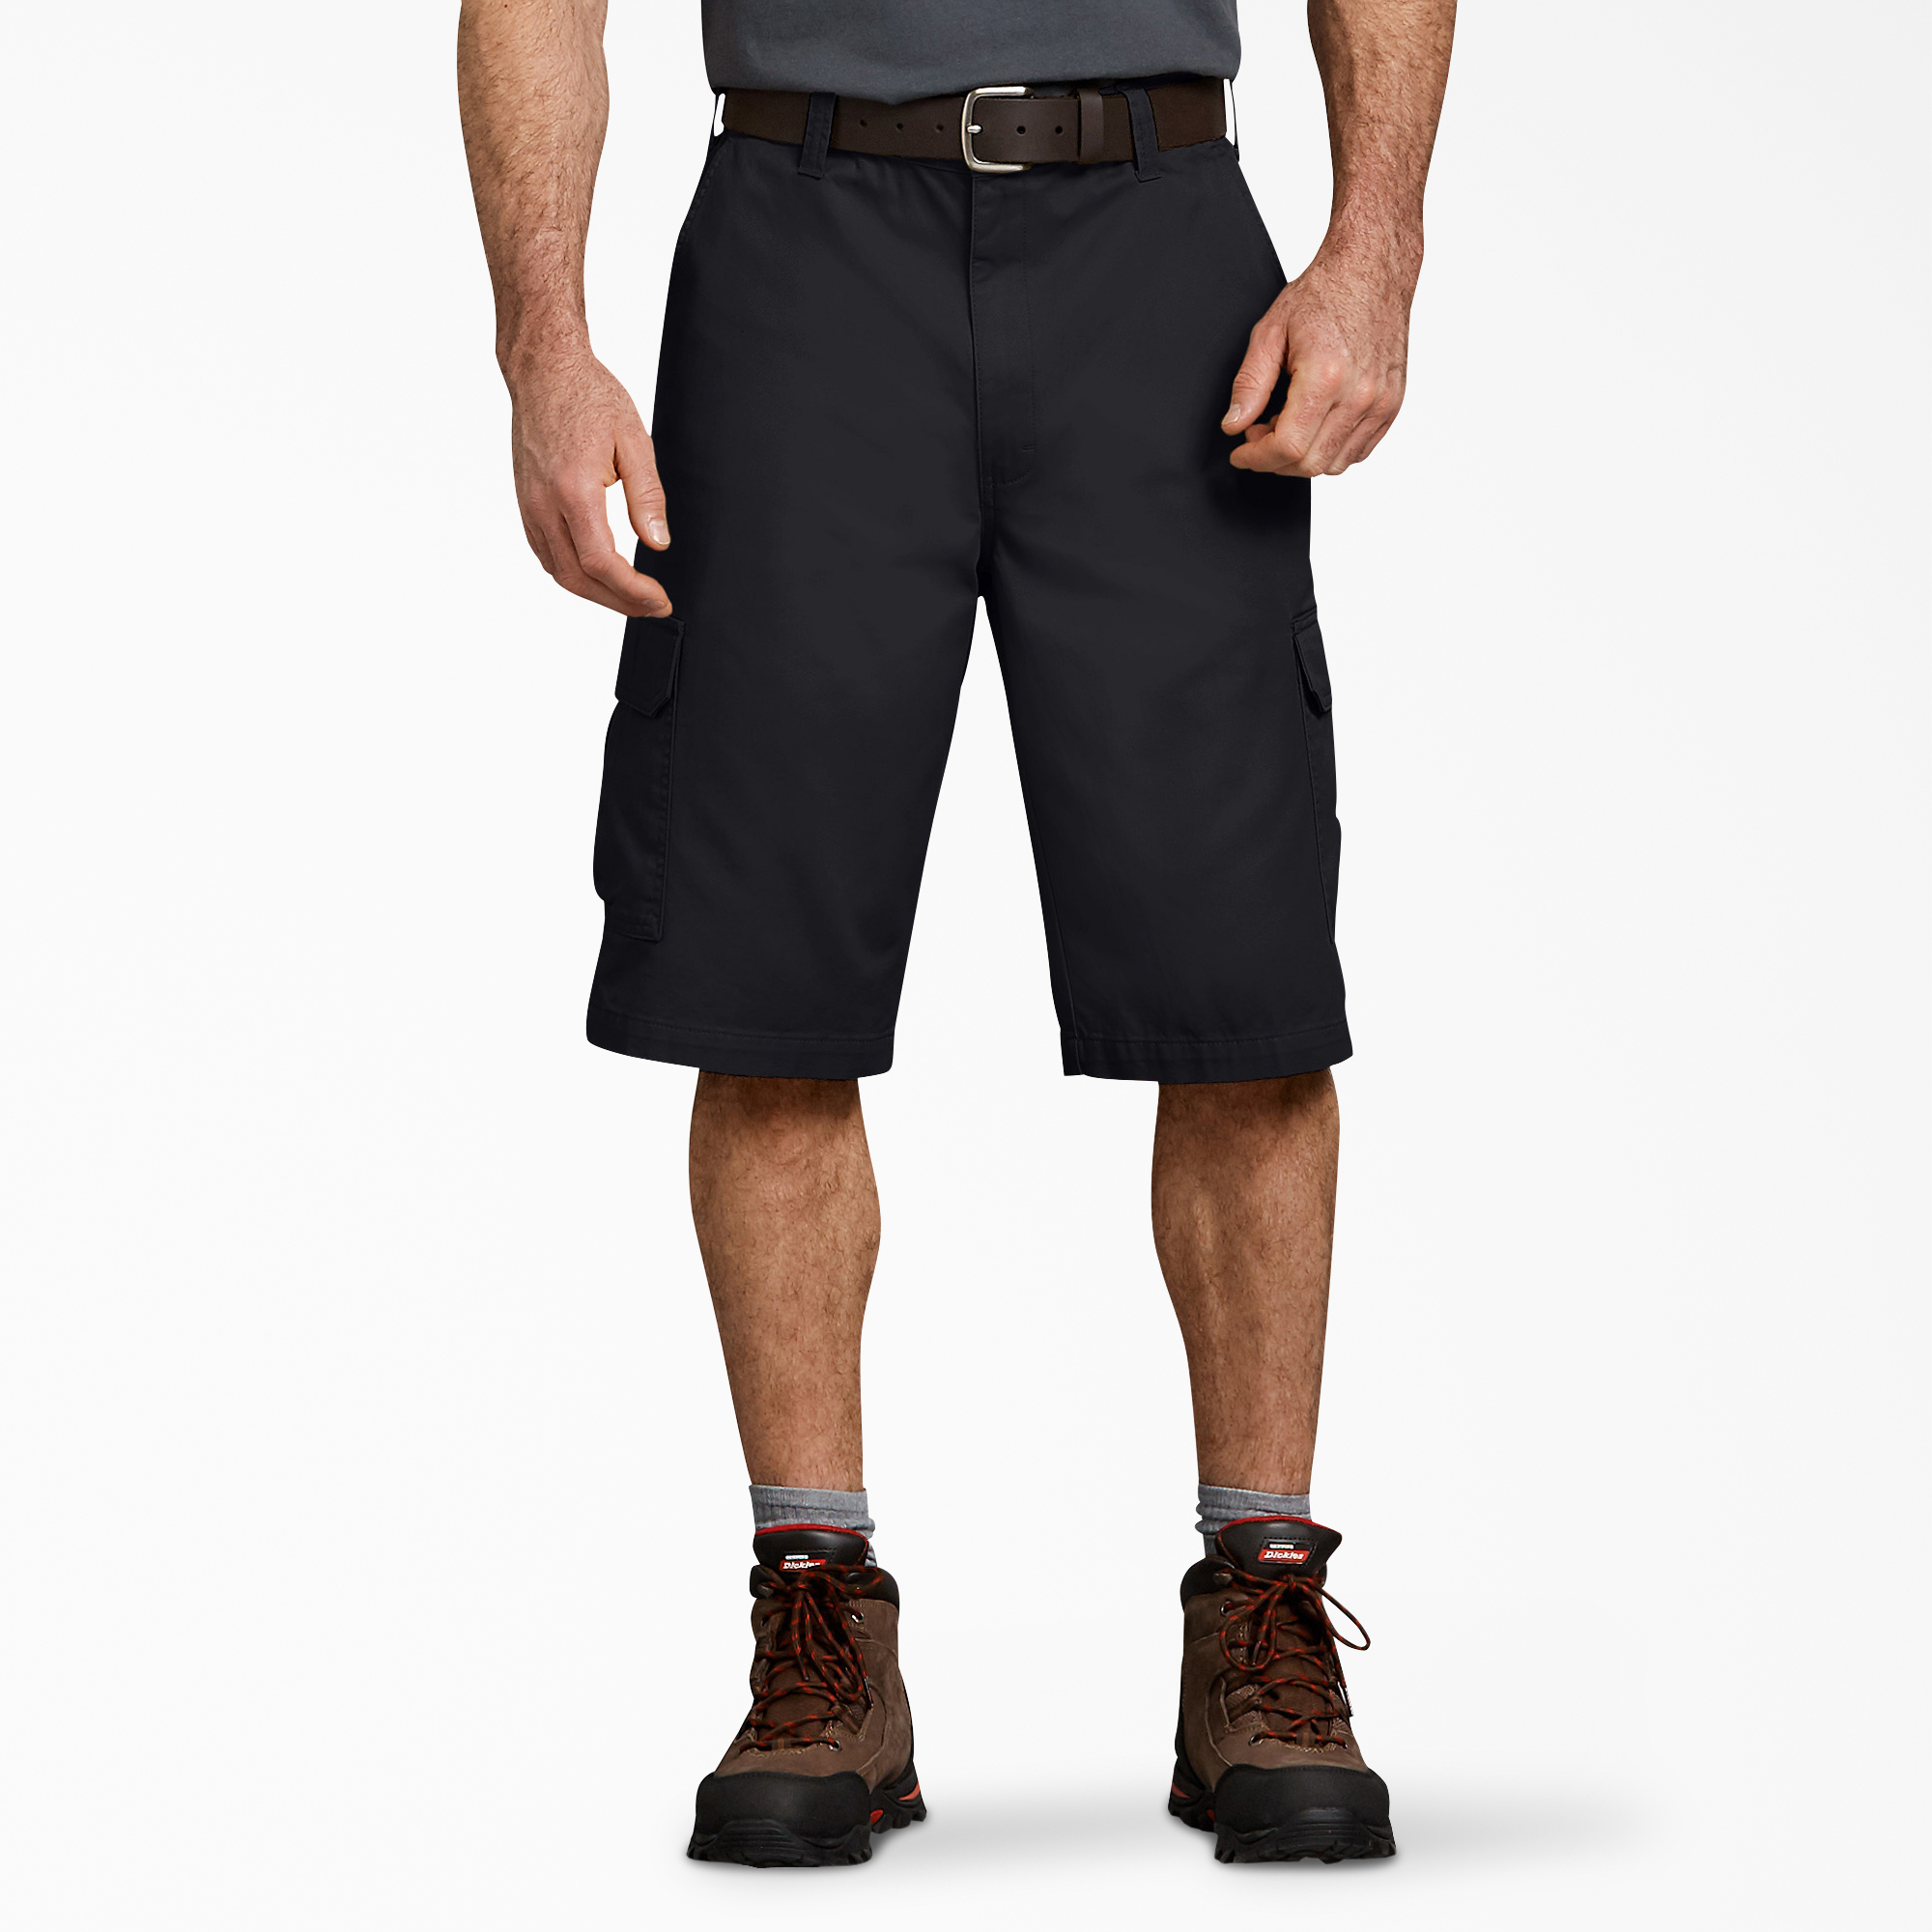 13" Loose Fit Cargo Shorts - Rinsed Black (RBK)